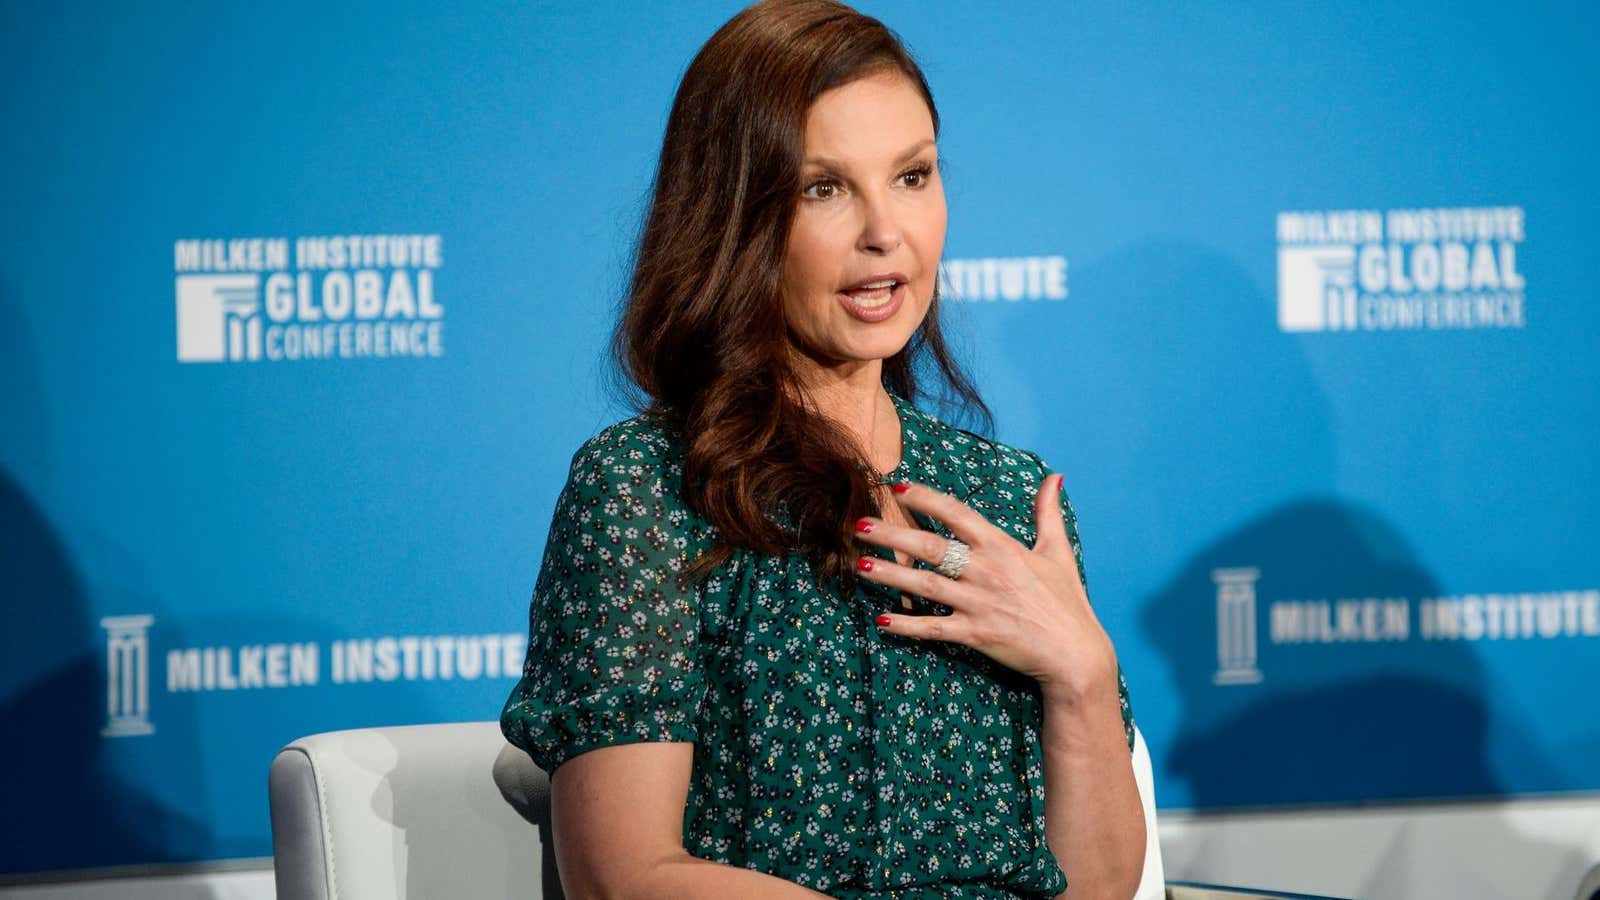 After #MeToo, actress Ashley Judd says she sees institutional weakness instead of courage.